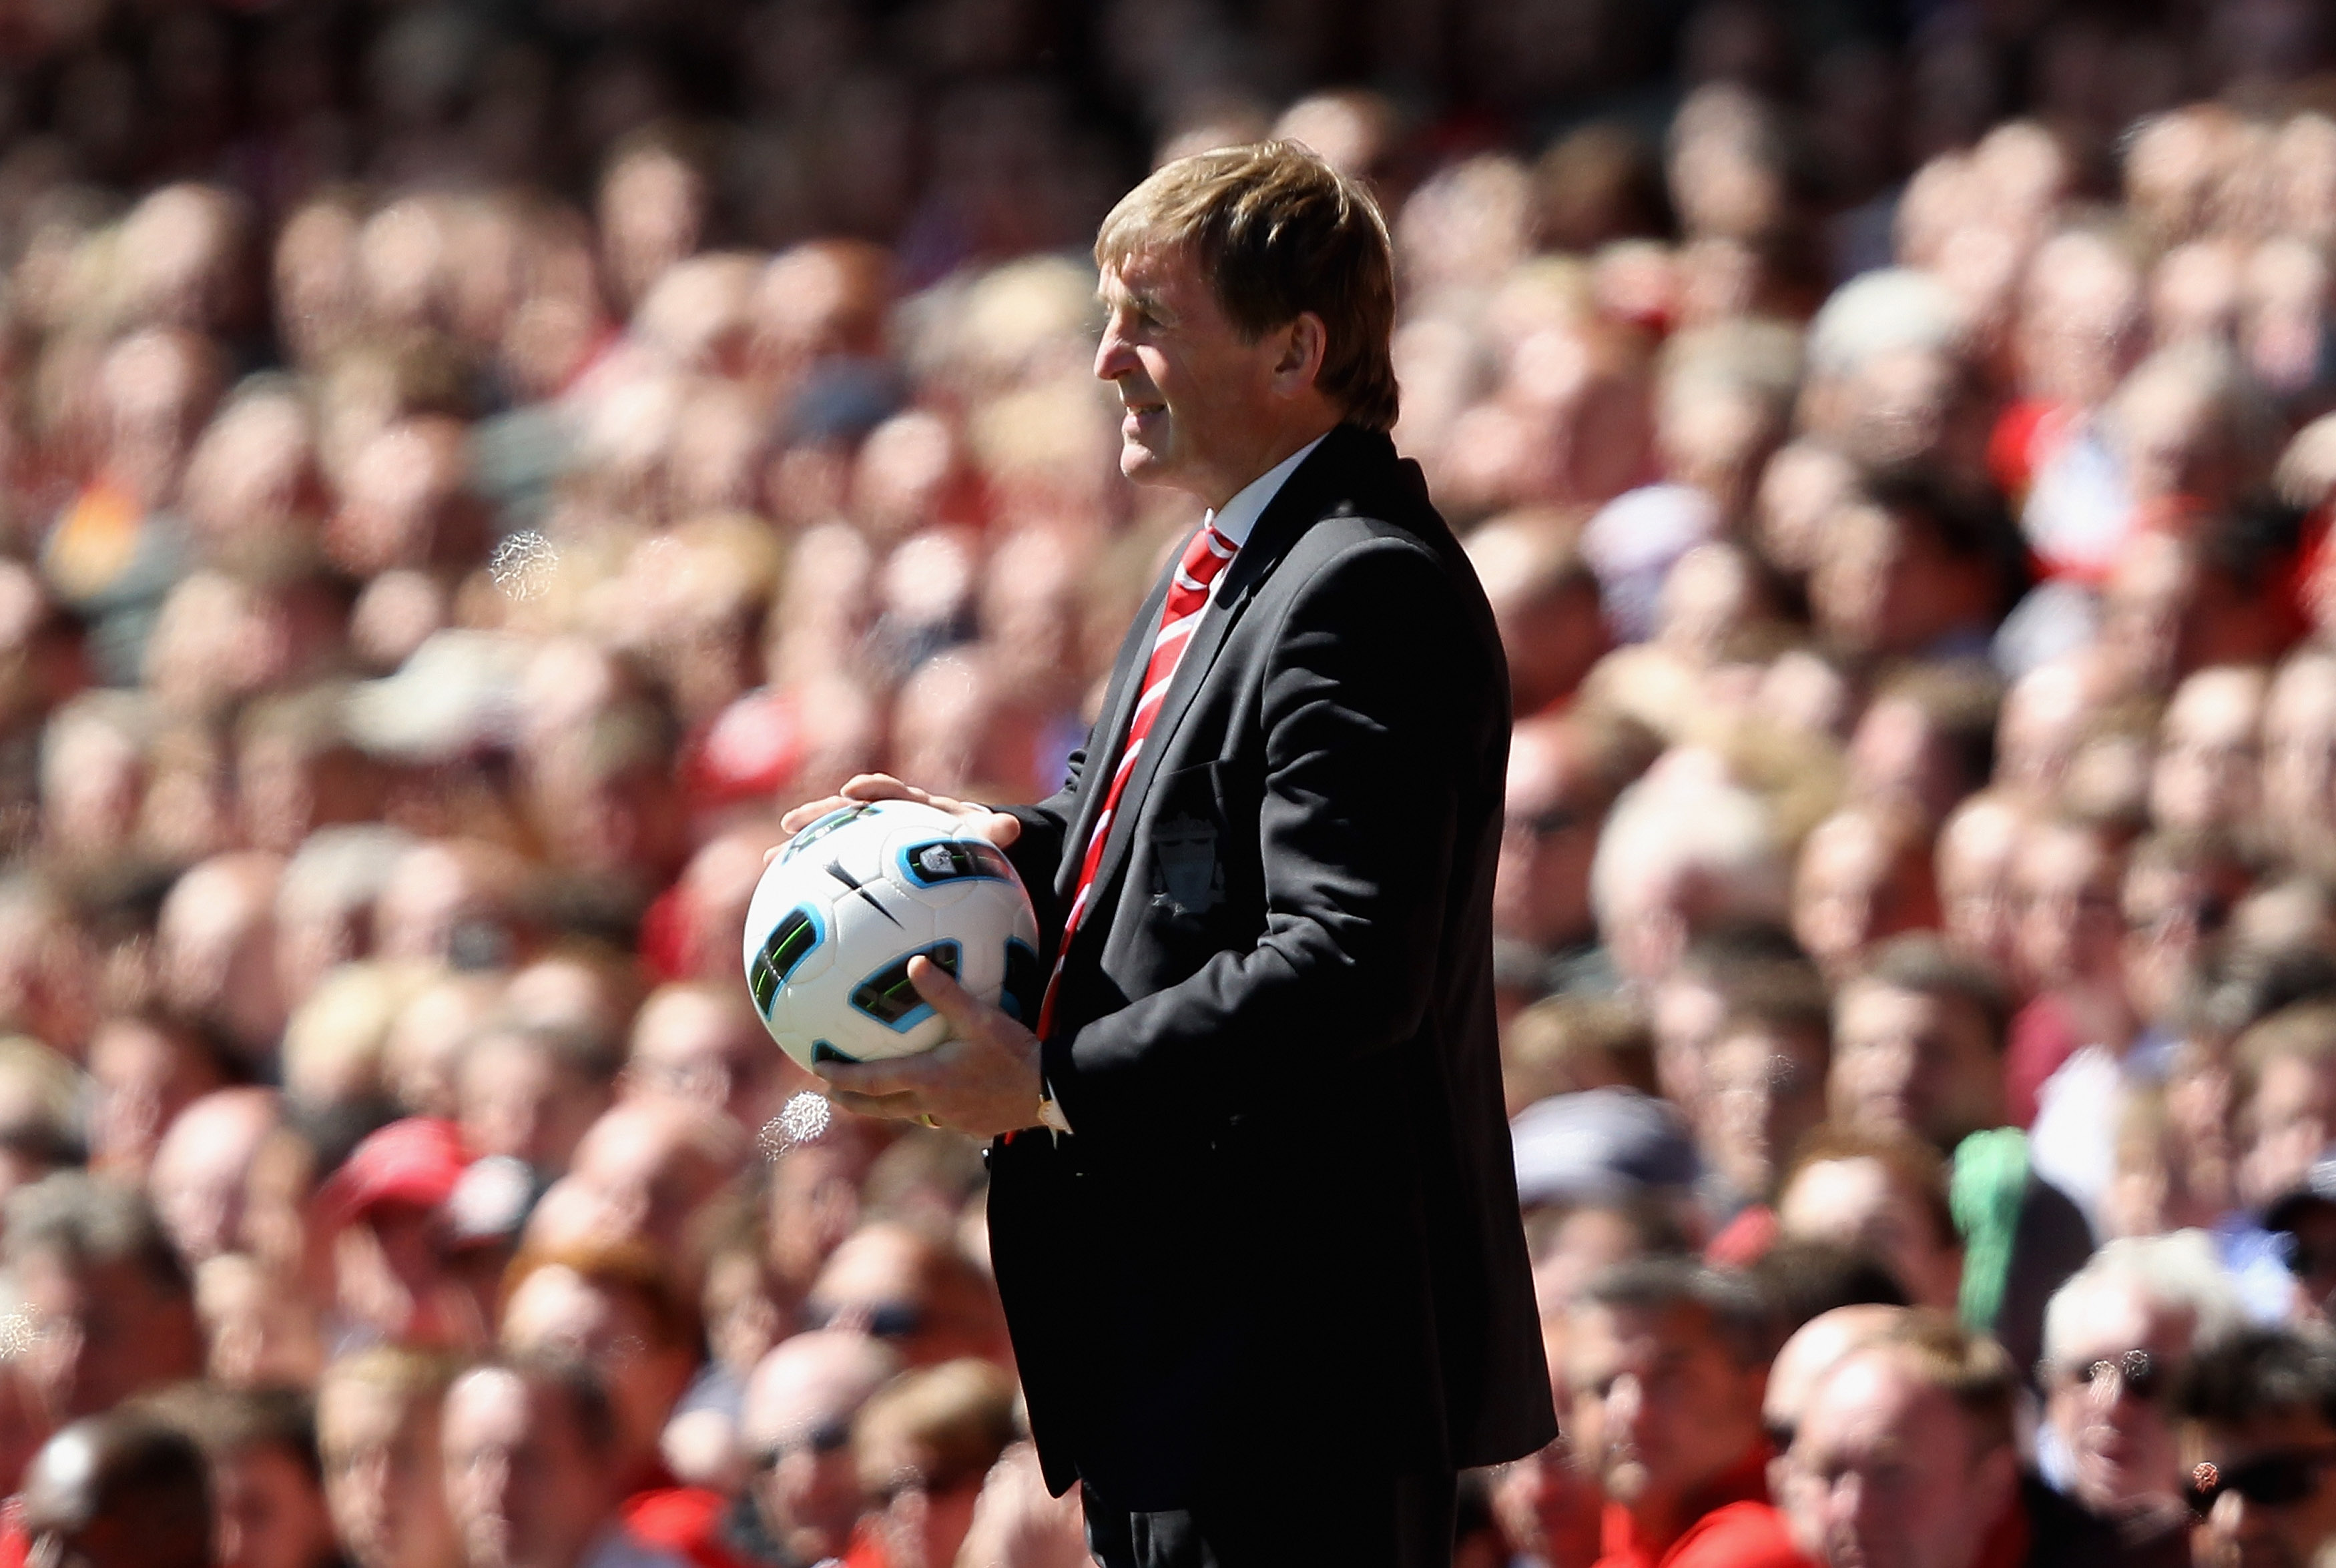 LIVERPOOL, ENGLAND - MAY 01:   Liverpool manager Kenny Dalglish during the Barclays Premier League match between Liverpool  and Newcastle United at Anfield on May 1, 2011 in Liverpool, England.  (Photo by Clive Brunskill/Getty Images)